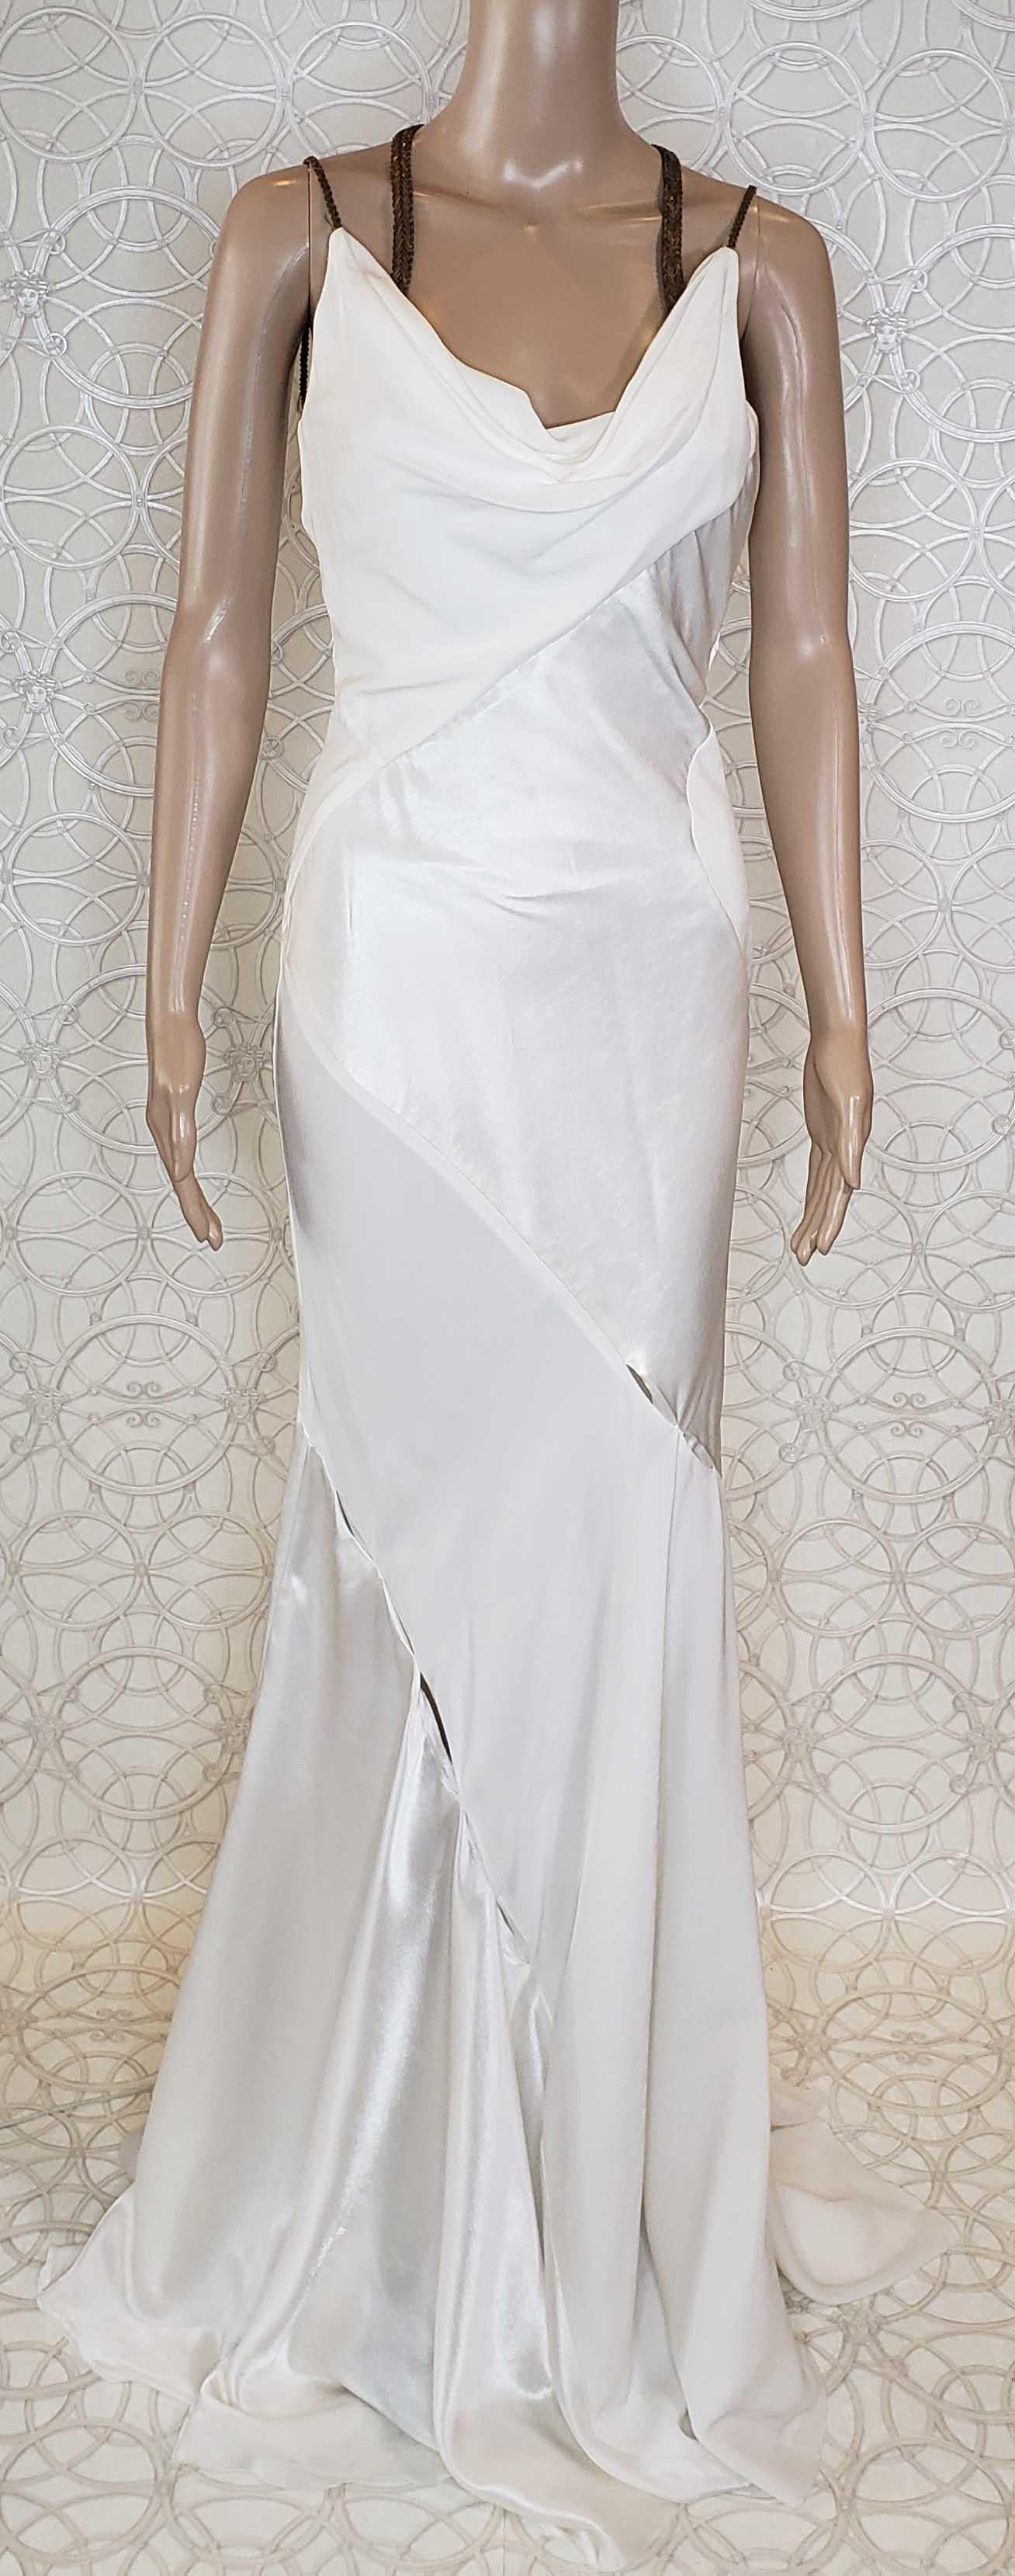 F/W 2014 Look # 51 NEW VERSACE WHITE GOWN DRESS as seen on Heidi 38 - 2 For Sale 1